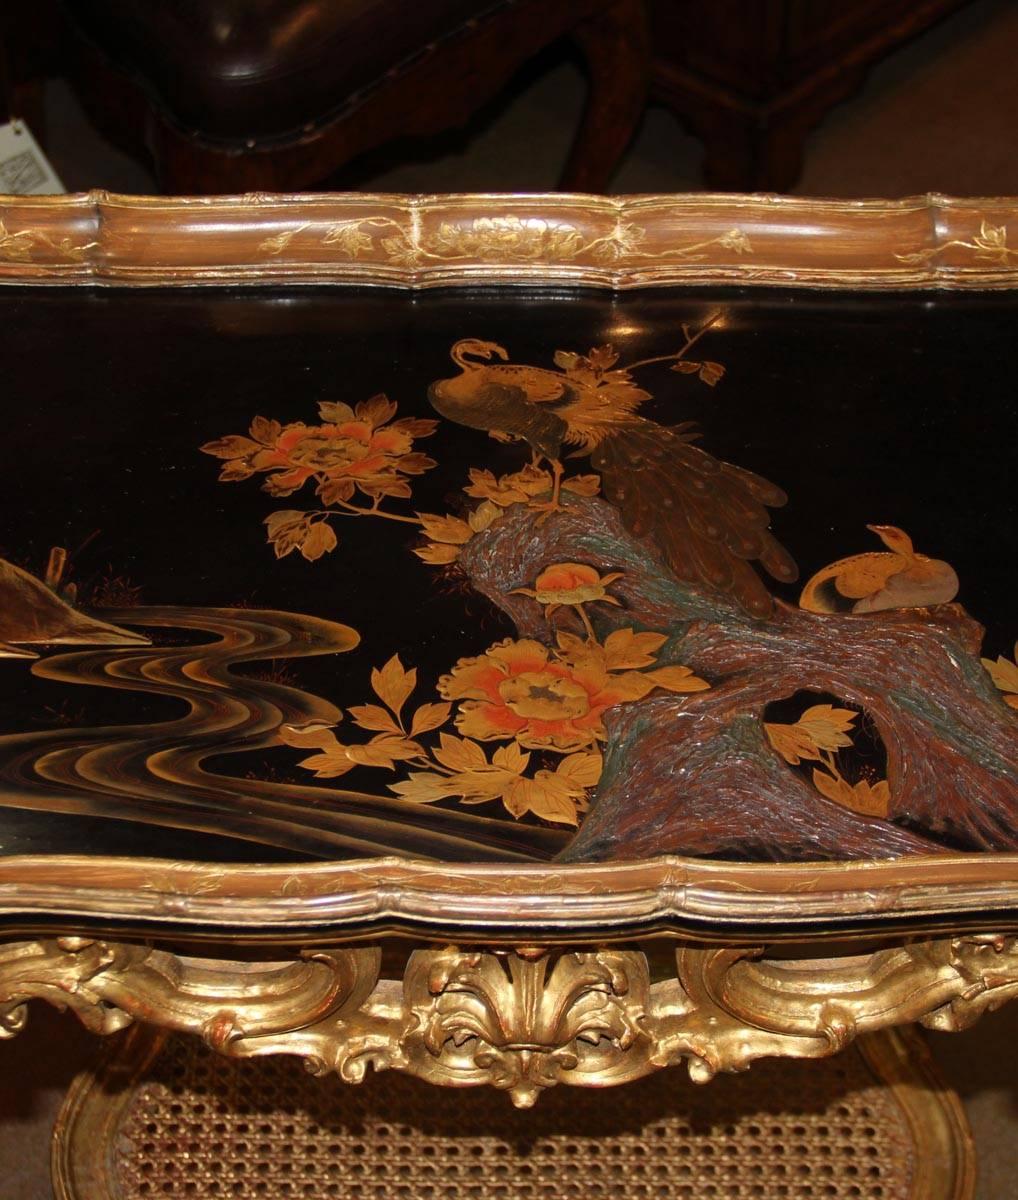 A 19th Century French Giltwood and Black Lacquered Japanned Table, the dished top featuring two beautiful peacocks (with iridescent feathers) among rocks and flowers, and with a fretted apron centered by a scallop shell above a caned and gilded